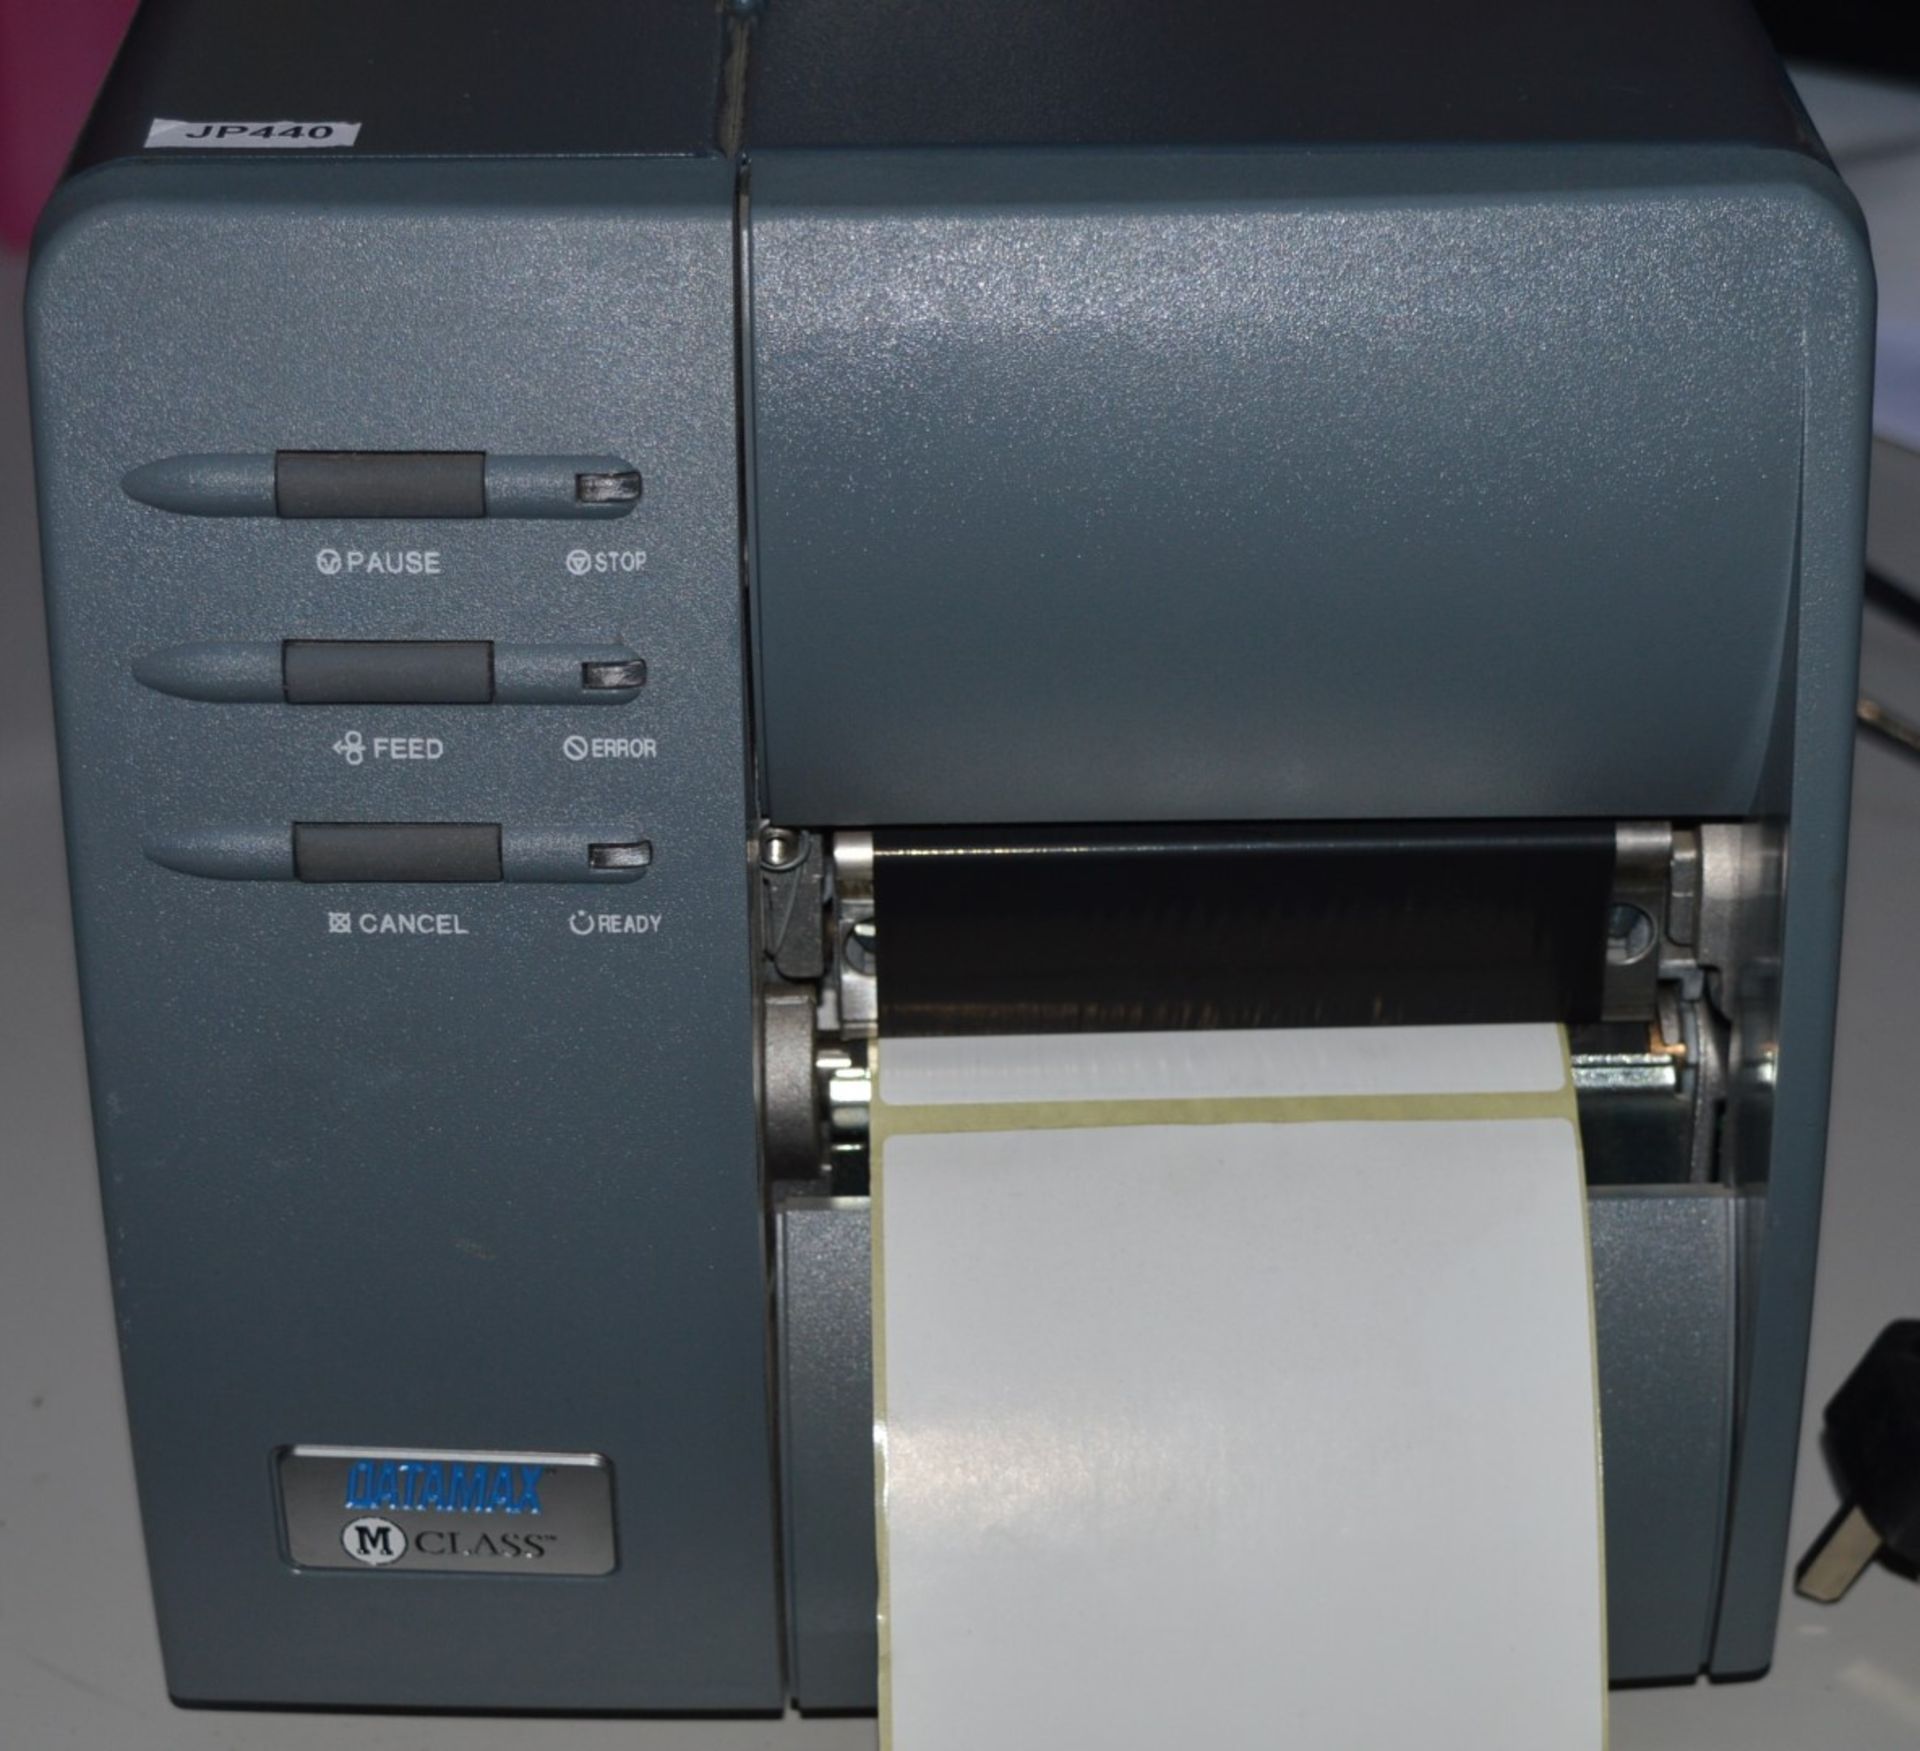 1 x Datamax M Class Thermal Label Printer - Includes Power Lead and USB Lead - Ref JP440 - CL011 - - Image 3 of 7